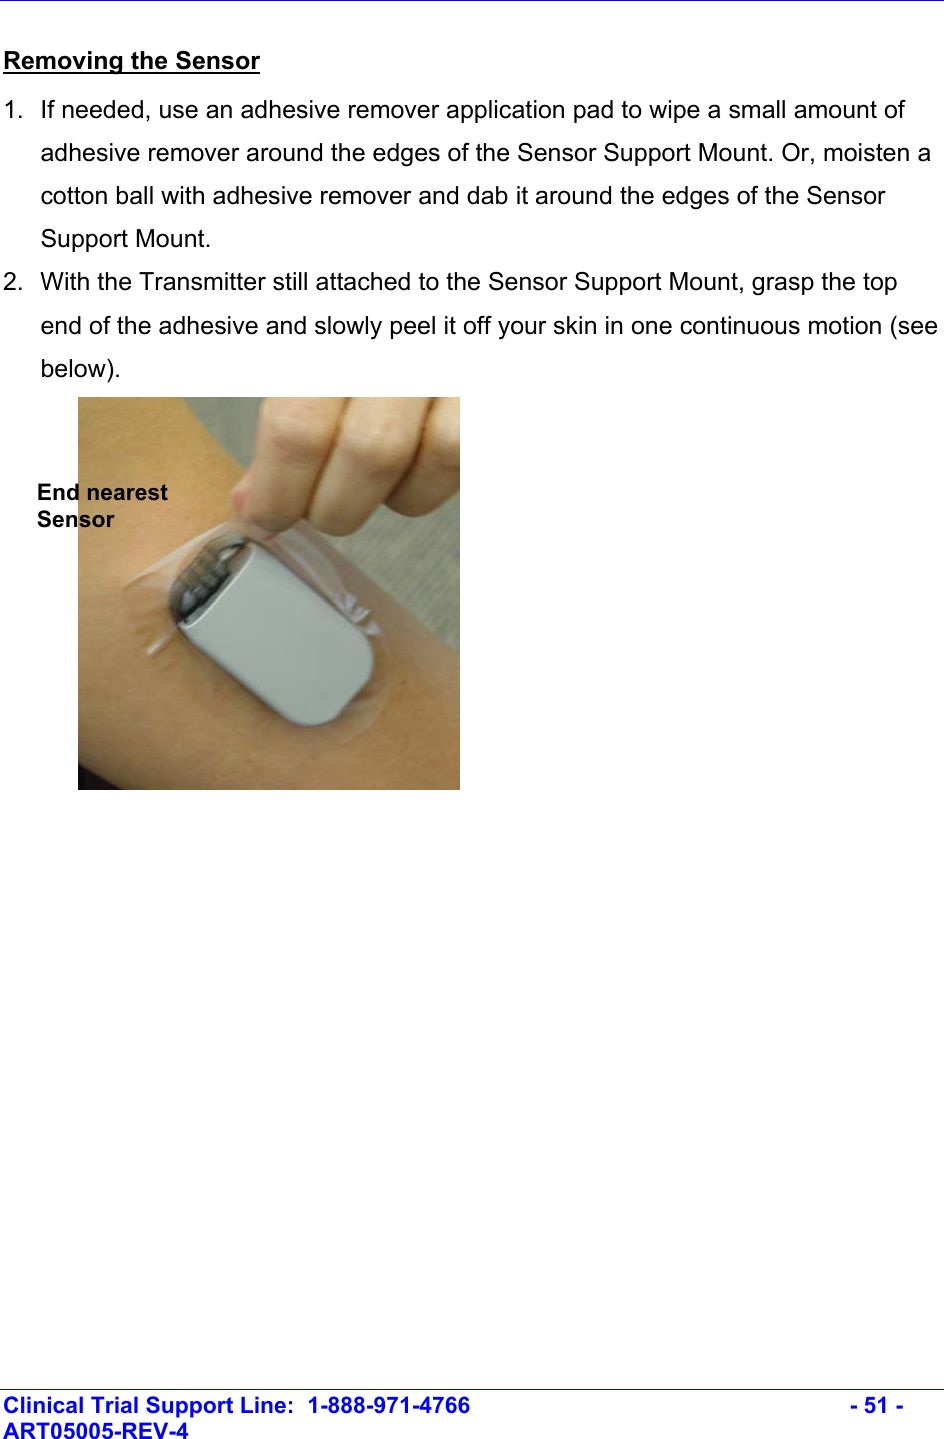    Clinical Trial Support Line:  1-888-971-4766   - 51 - ART05005-REV-4   Removing the Sensor 1.  If needed, use an adhesive remover application pad to wipe a small amount of adhesive remover around the edges of the Sensor Support Mount. Or, moisten a cotton ball with adhesive remover and dab it around the edges of the Sensor Support Mount. 2.  With the Transmitter still attached to the Sensor Support Mount, grasp the top end of the adhesive and slowly peel it off your skin in one continuous motion (see below).   End nearest Sensor 